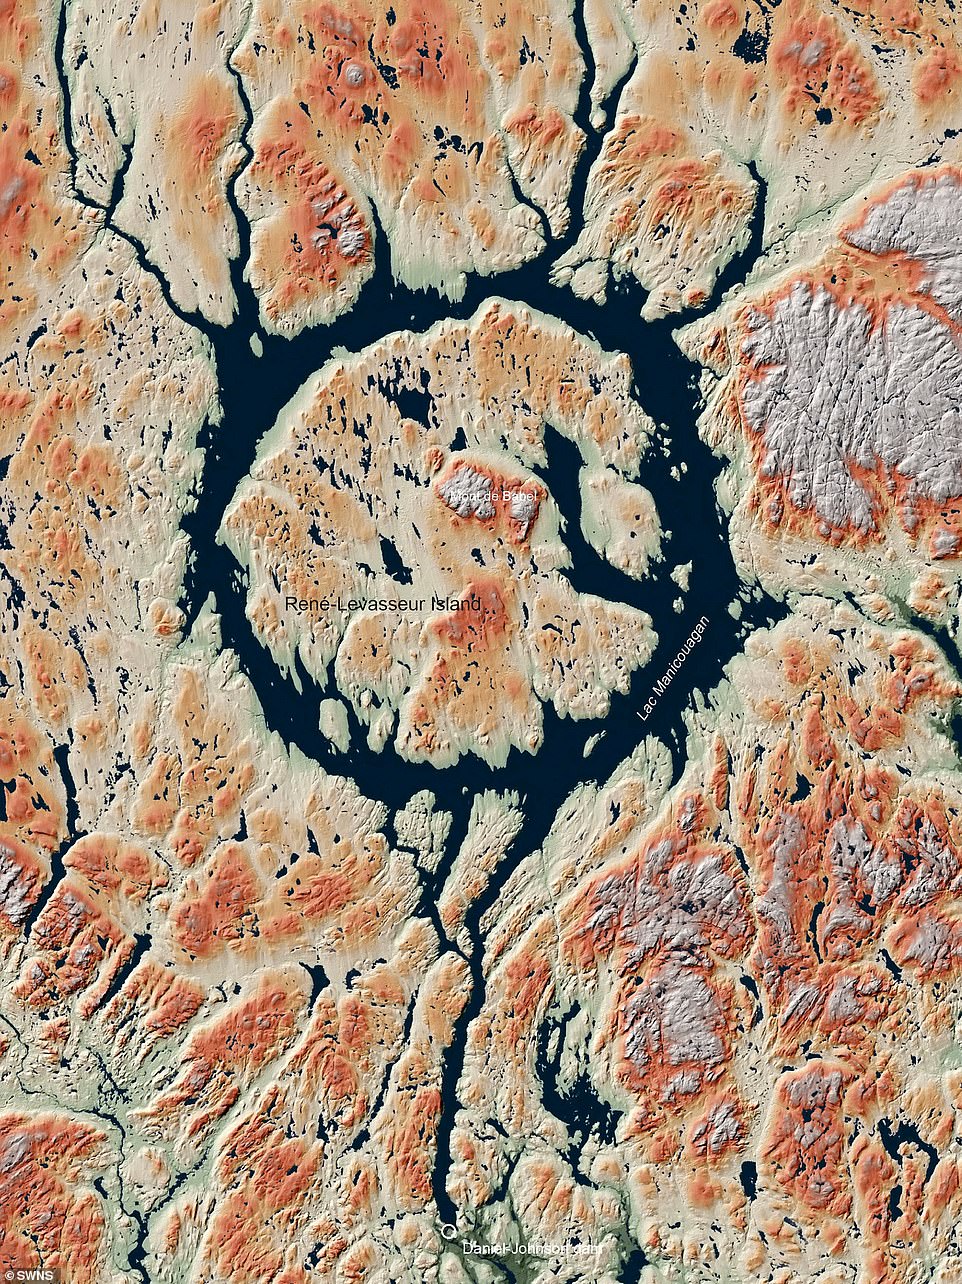 Between 2010 and 2016, researchers used a low-bit rabbit radar satellite called Tandem-X to measure every known microscope on the Earth's surface with an accuracy of up to one meter.  Picture: Manicoagan stands in Quebec, Canada